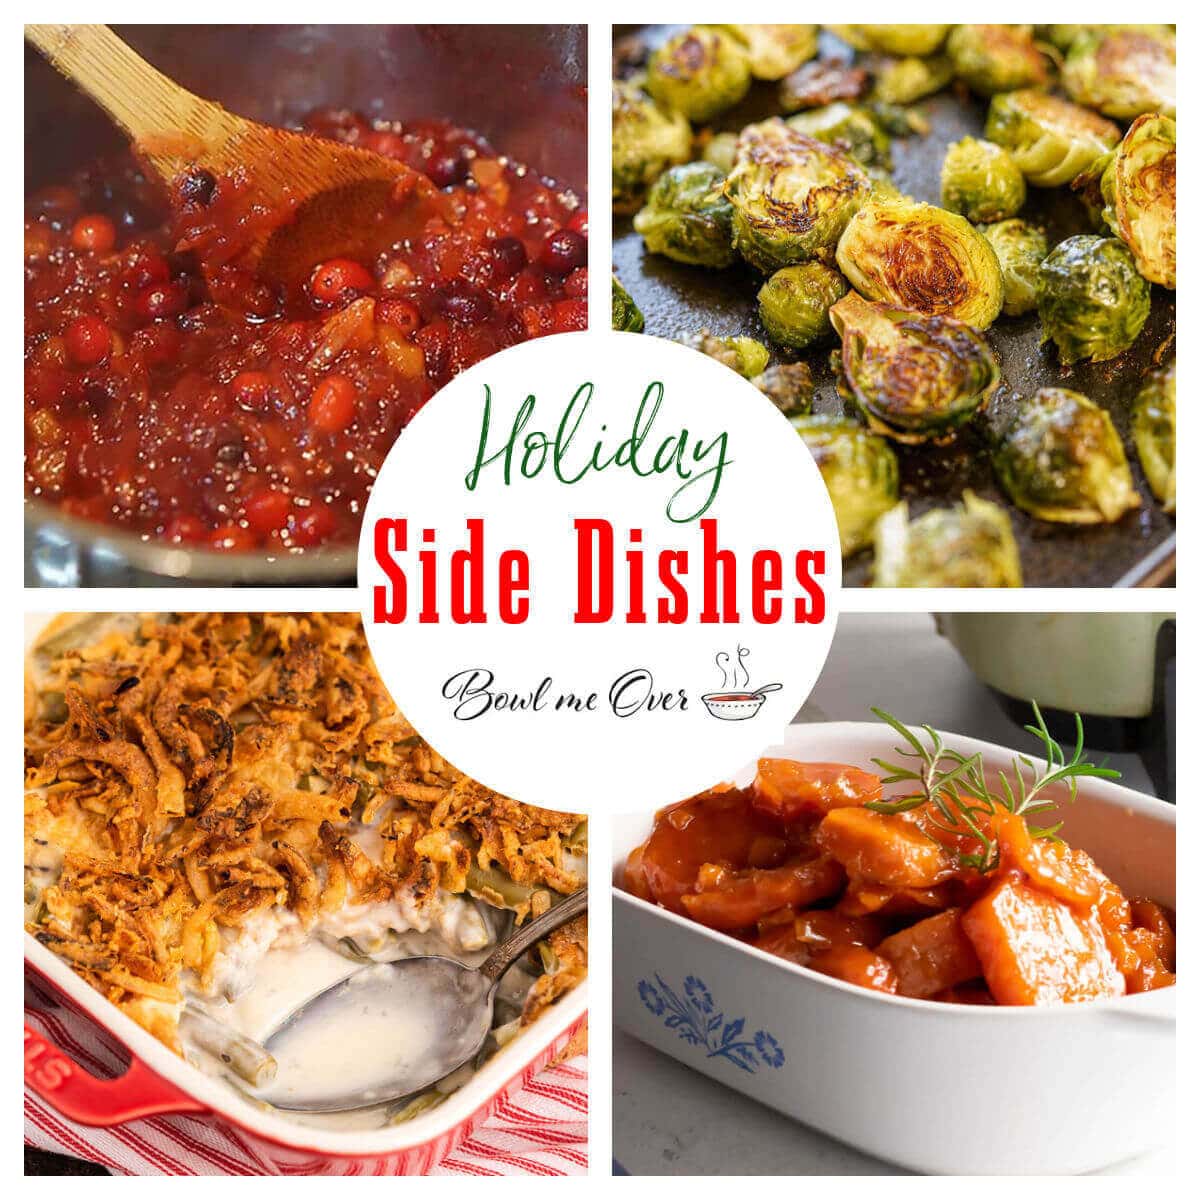 Collage of Holiday Side Dishes with print overlay. 